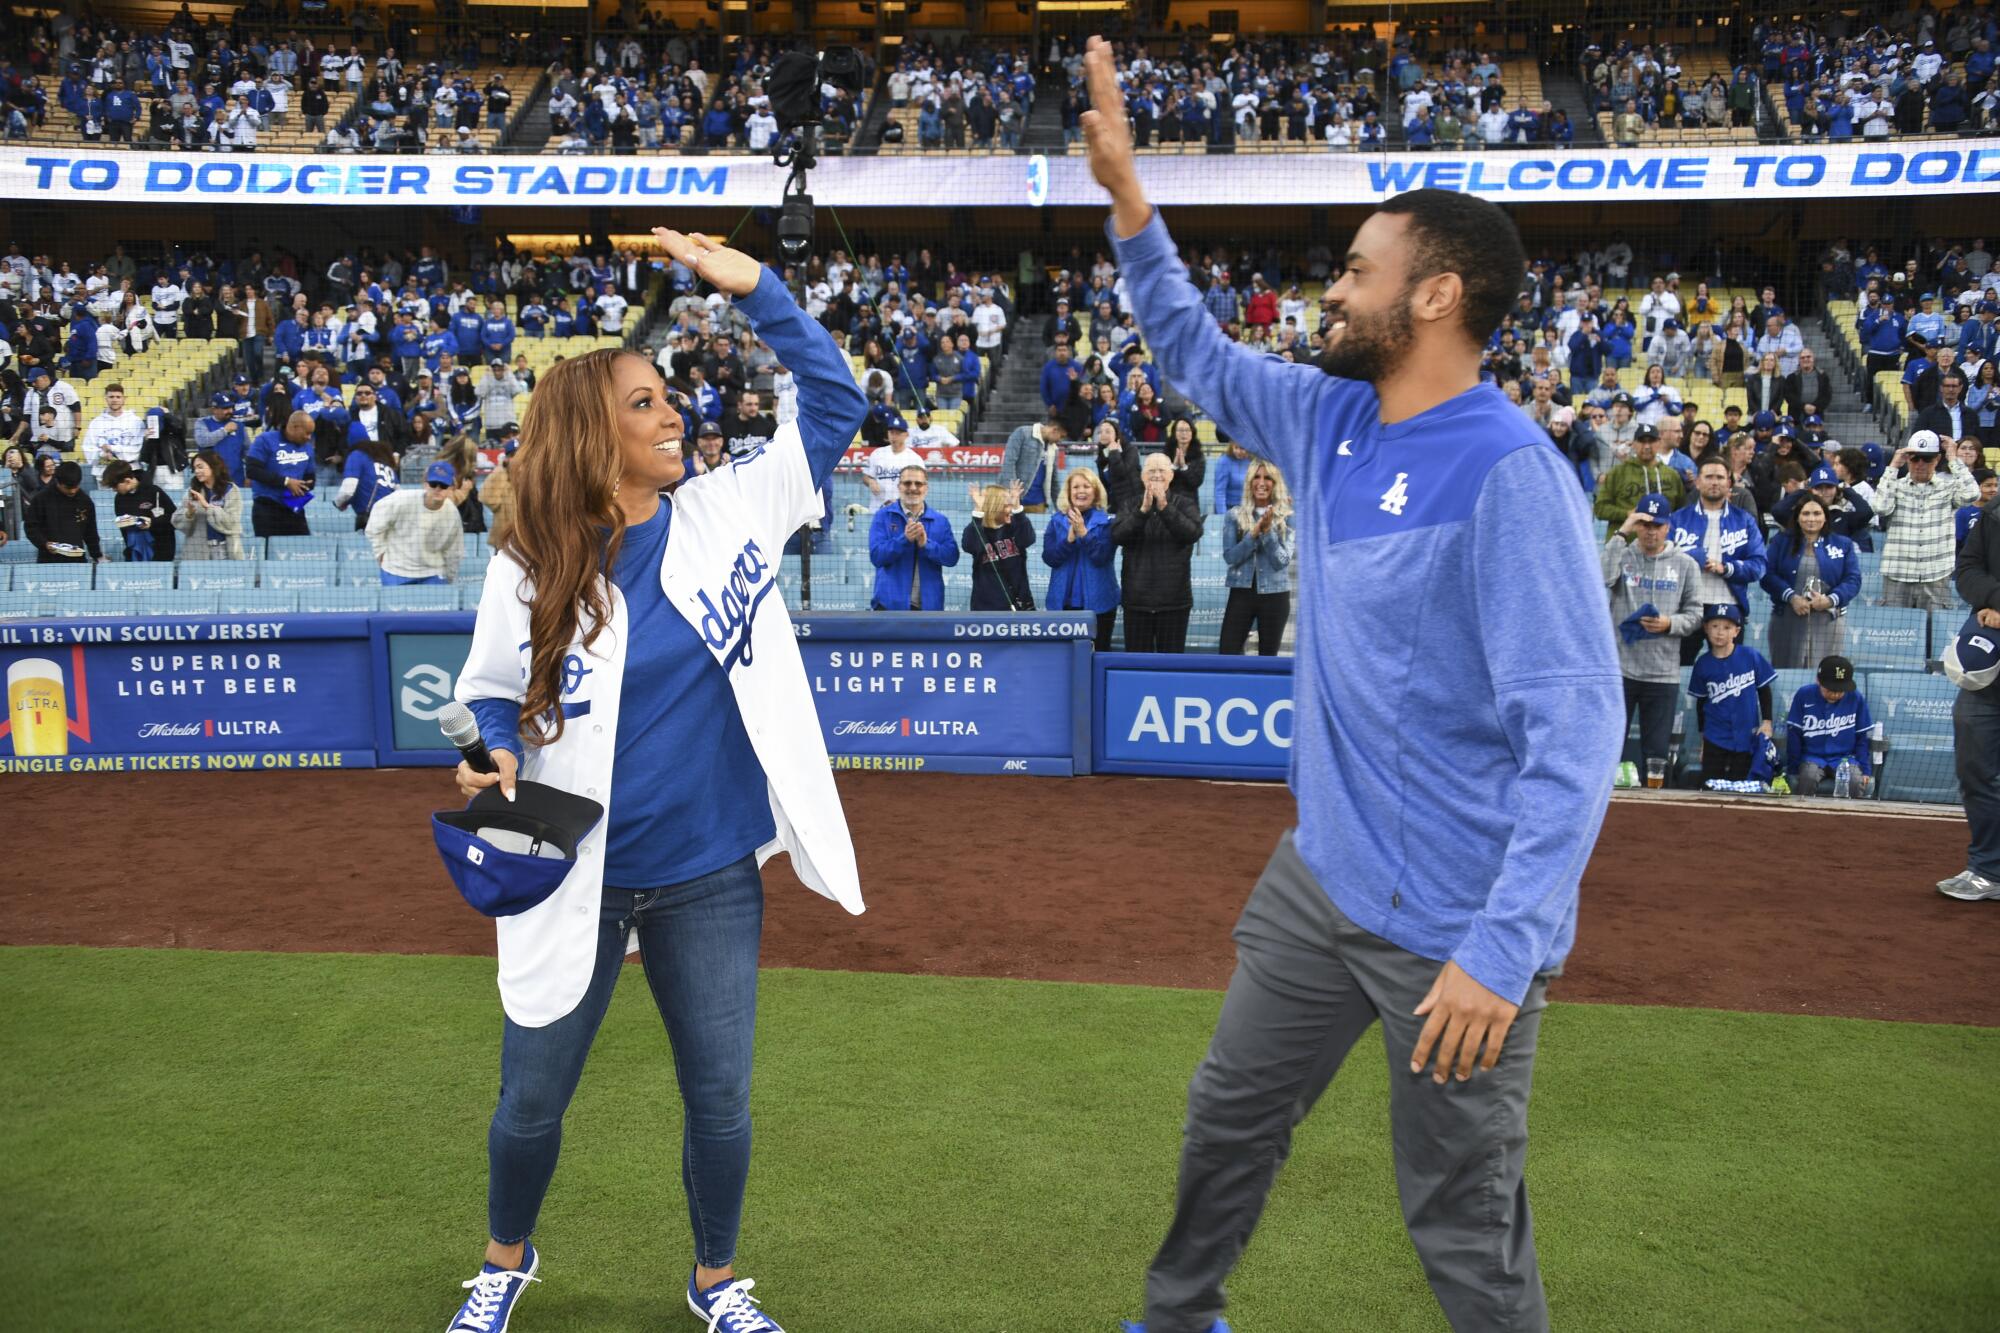 Holly Robinson-Peete gives her son, RJ Peete, a high-five before a game at Dodger Stadium.